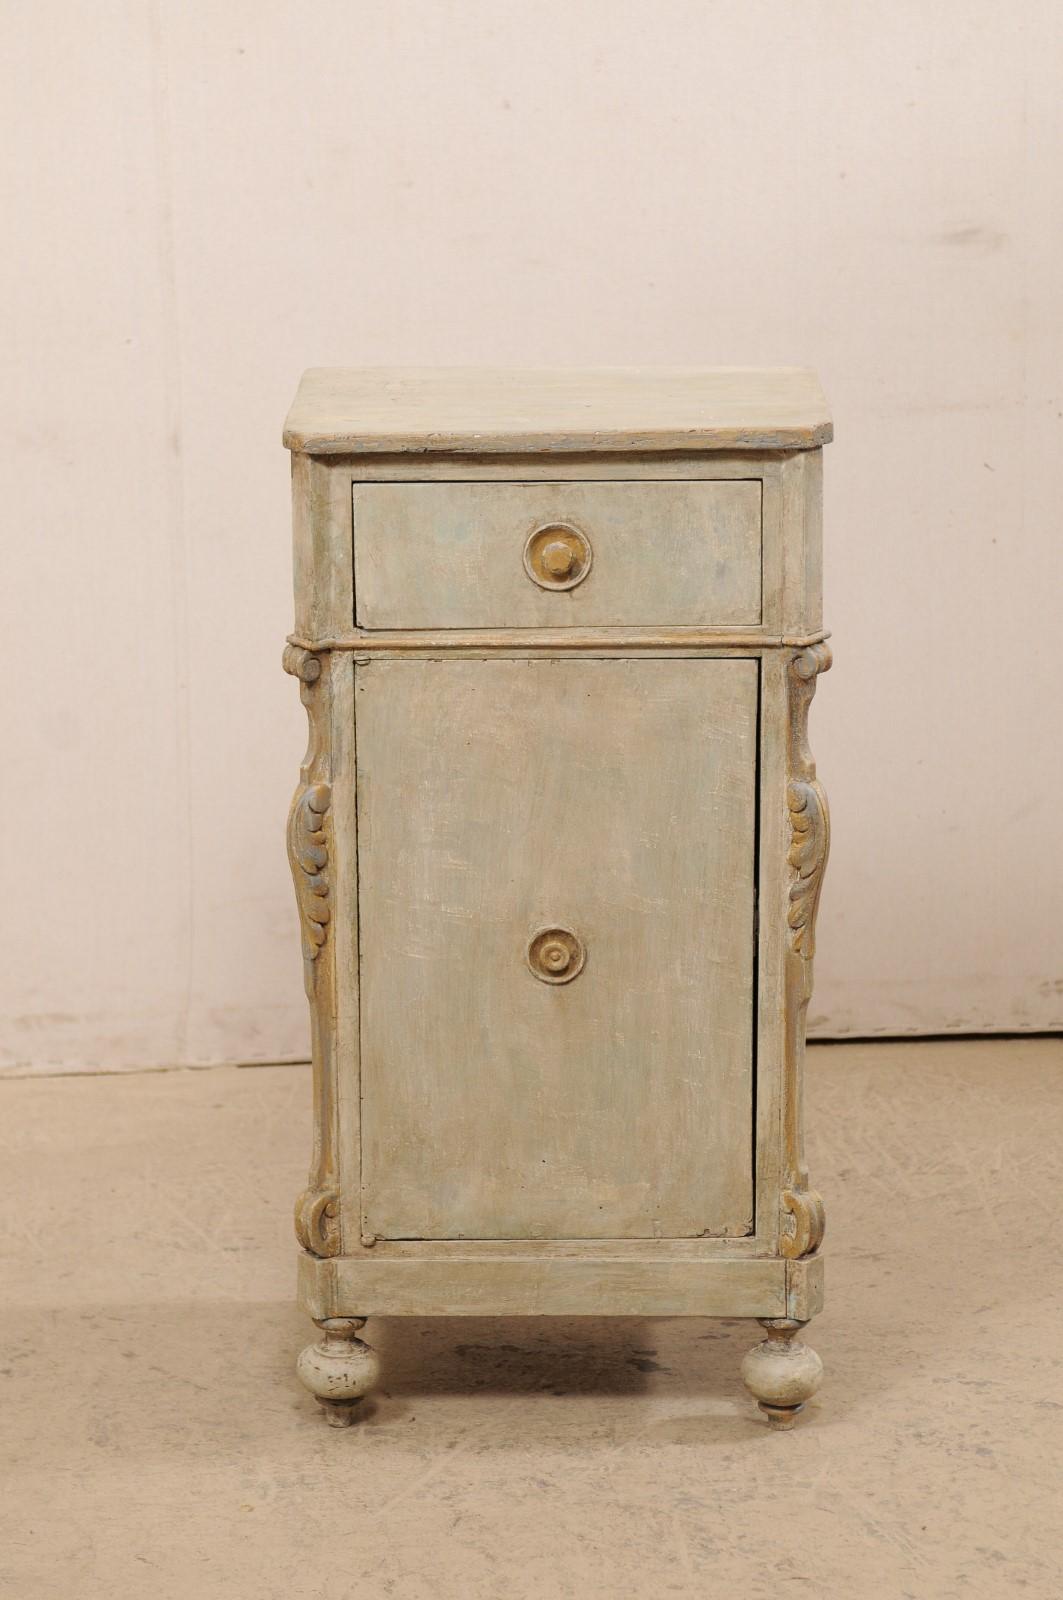 19th C. European Painted Wood Cabinet, Cute Petite Size!  Light Blue/Grey w/Gold 5